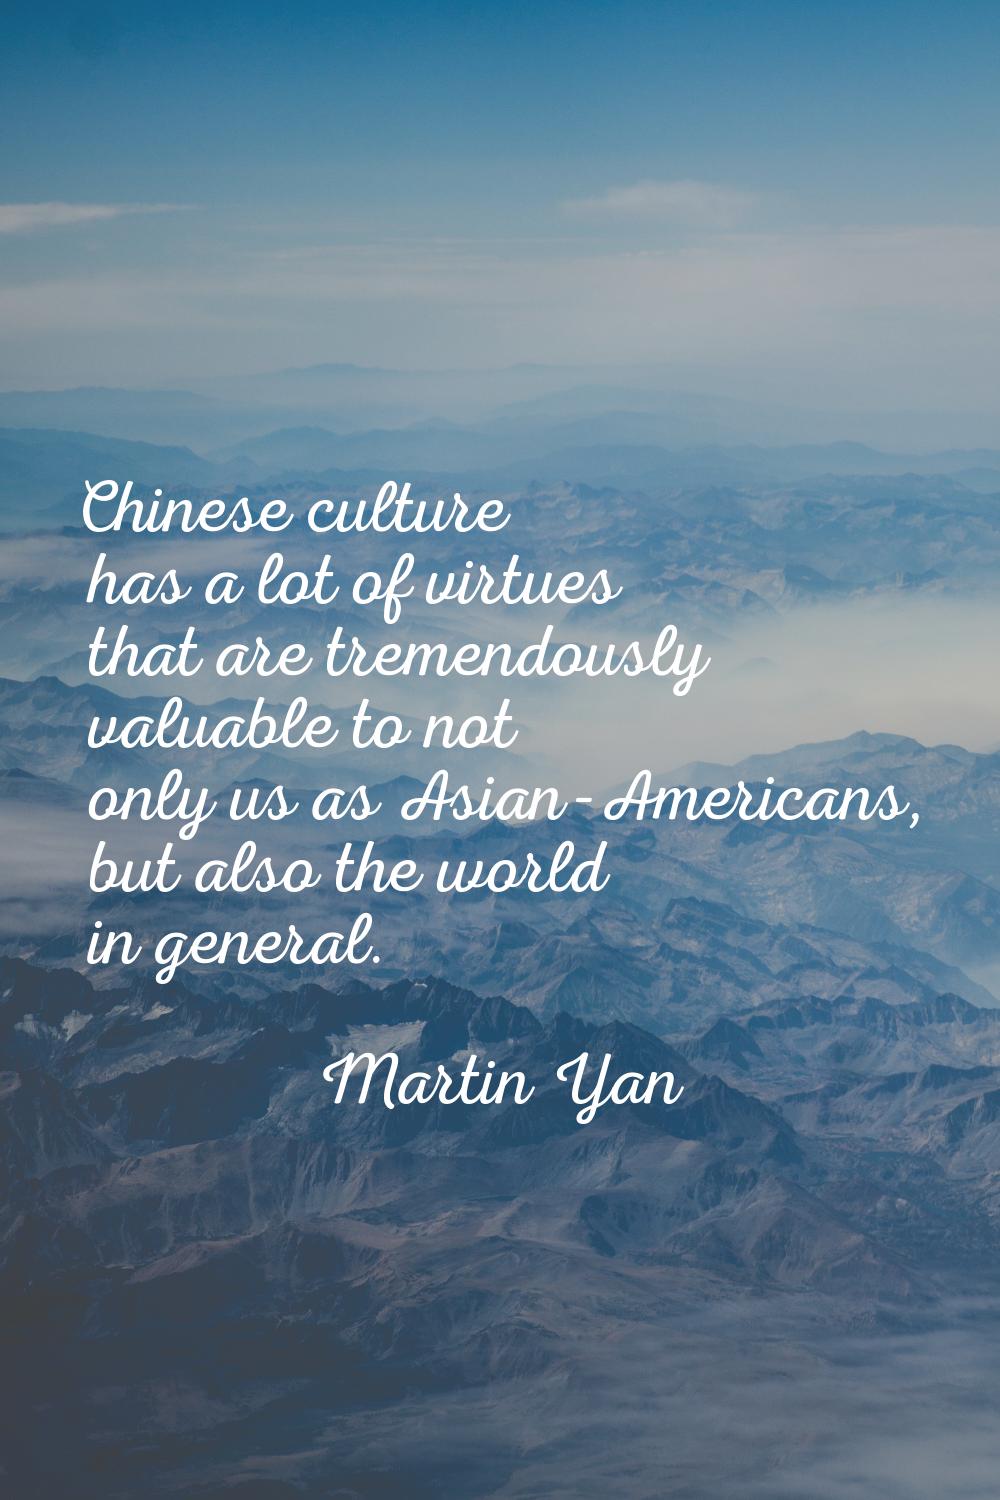 Chinese culture has a lot of virtues that are tremendously valuable to not only us as Asian-America